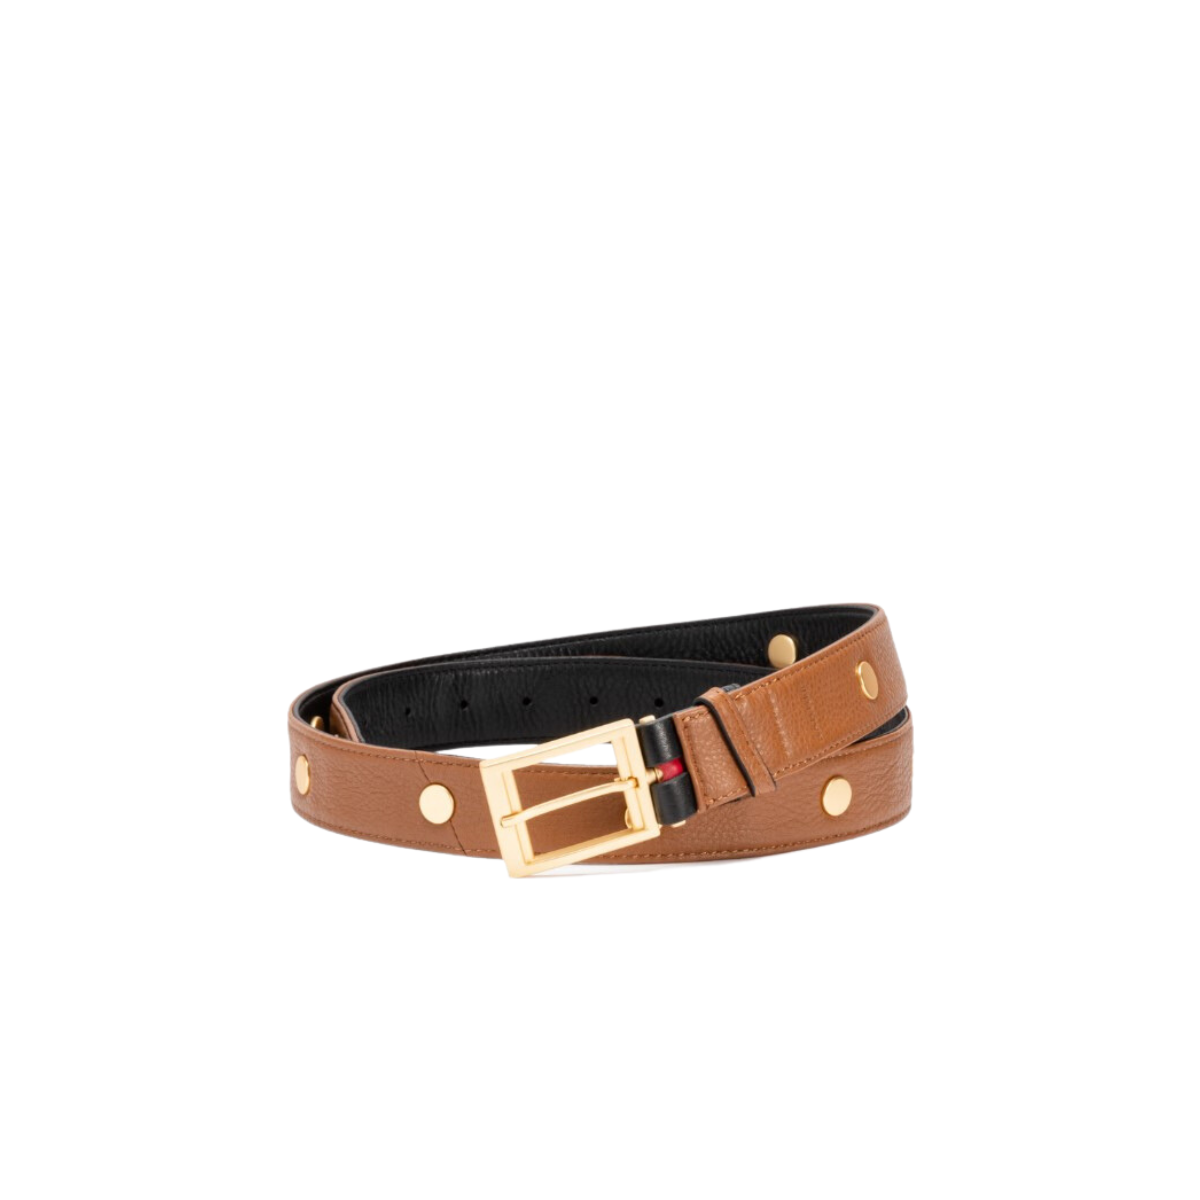 Hammitt Charlie Reversible Riveted Belt in Black & Mahogany Pebble with Brushed Gold